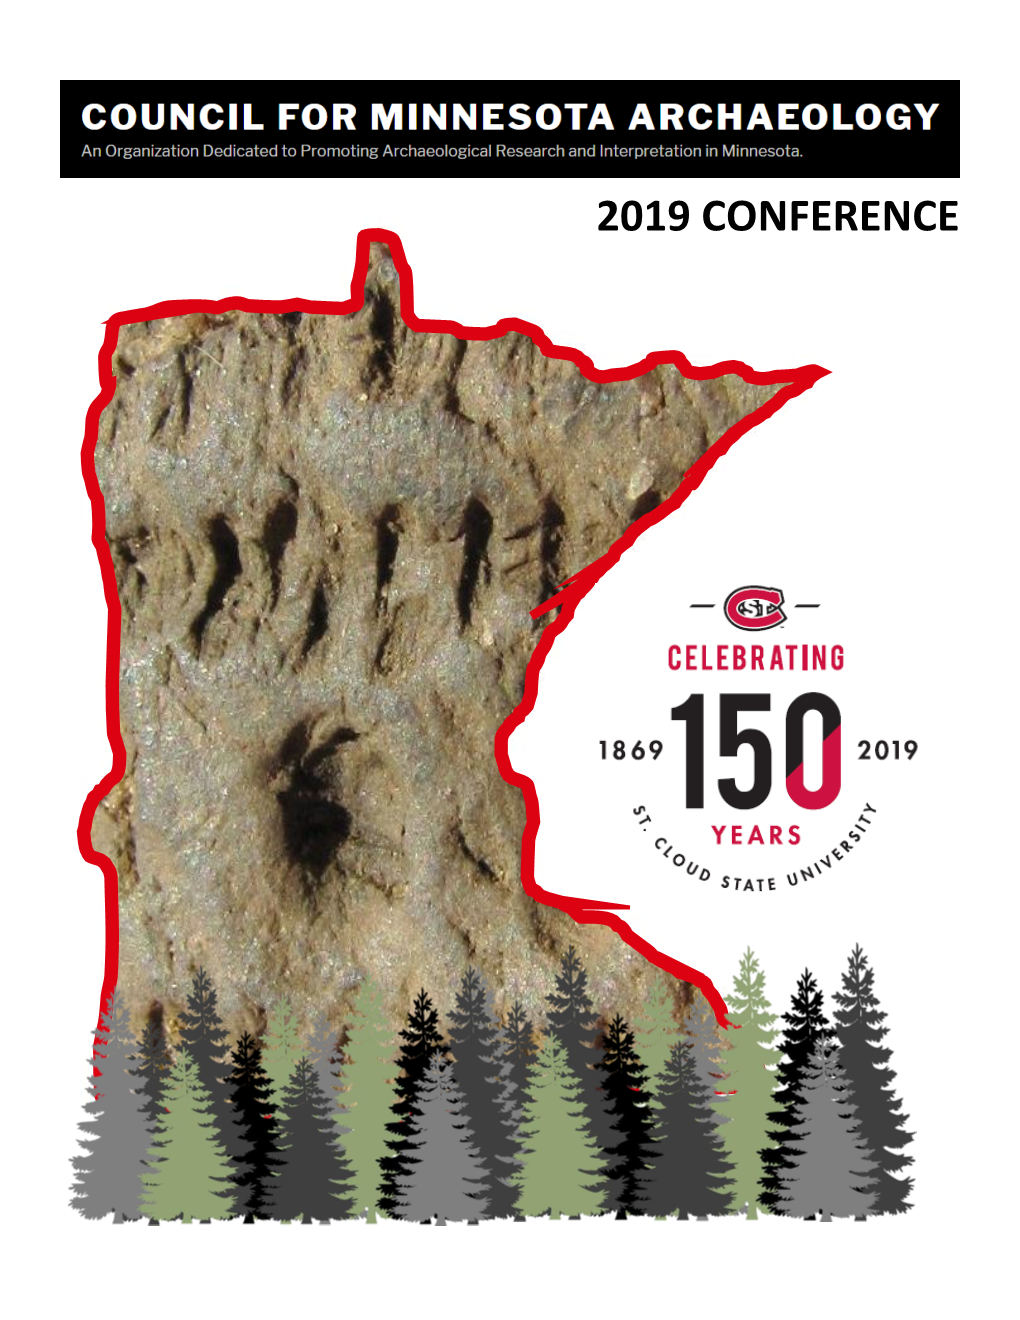 2019 Conference 2019 Council for Minnesota Archaeology Conference